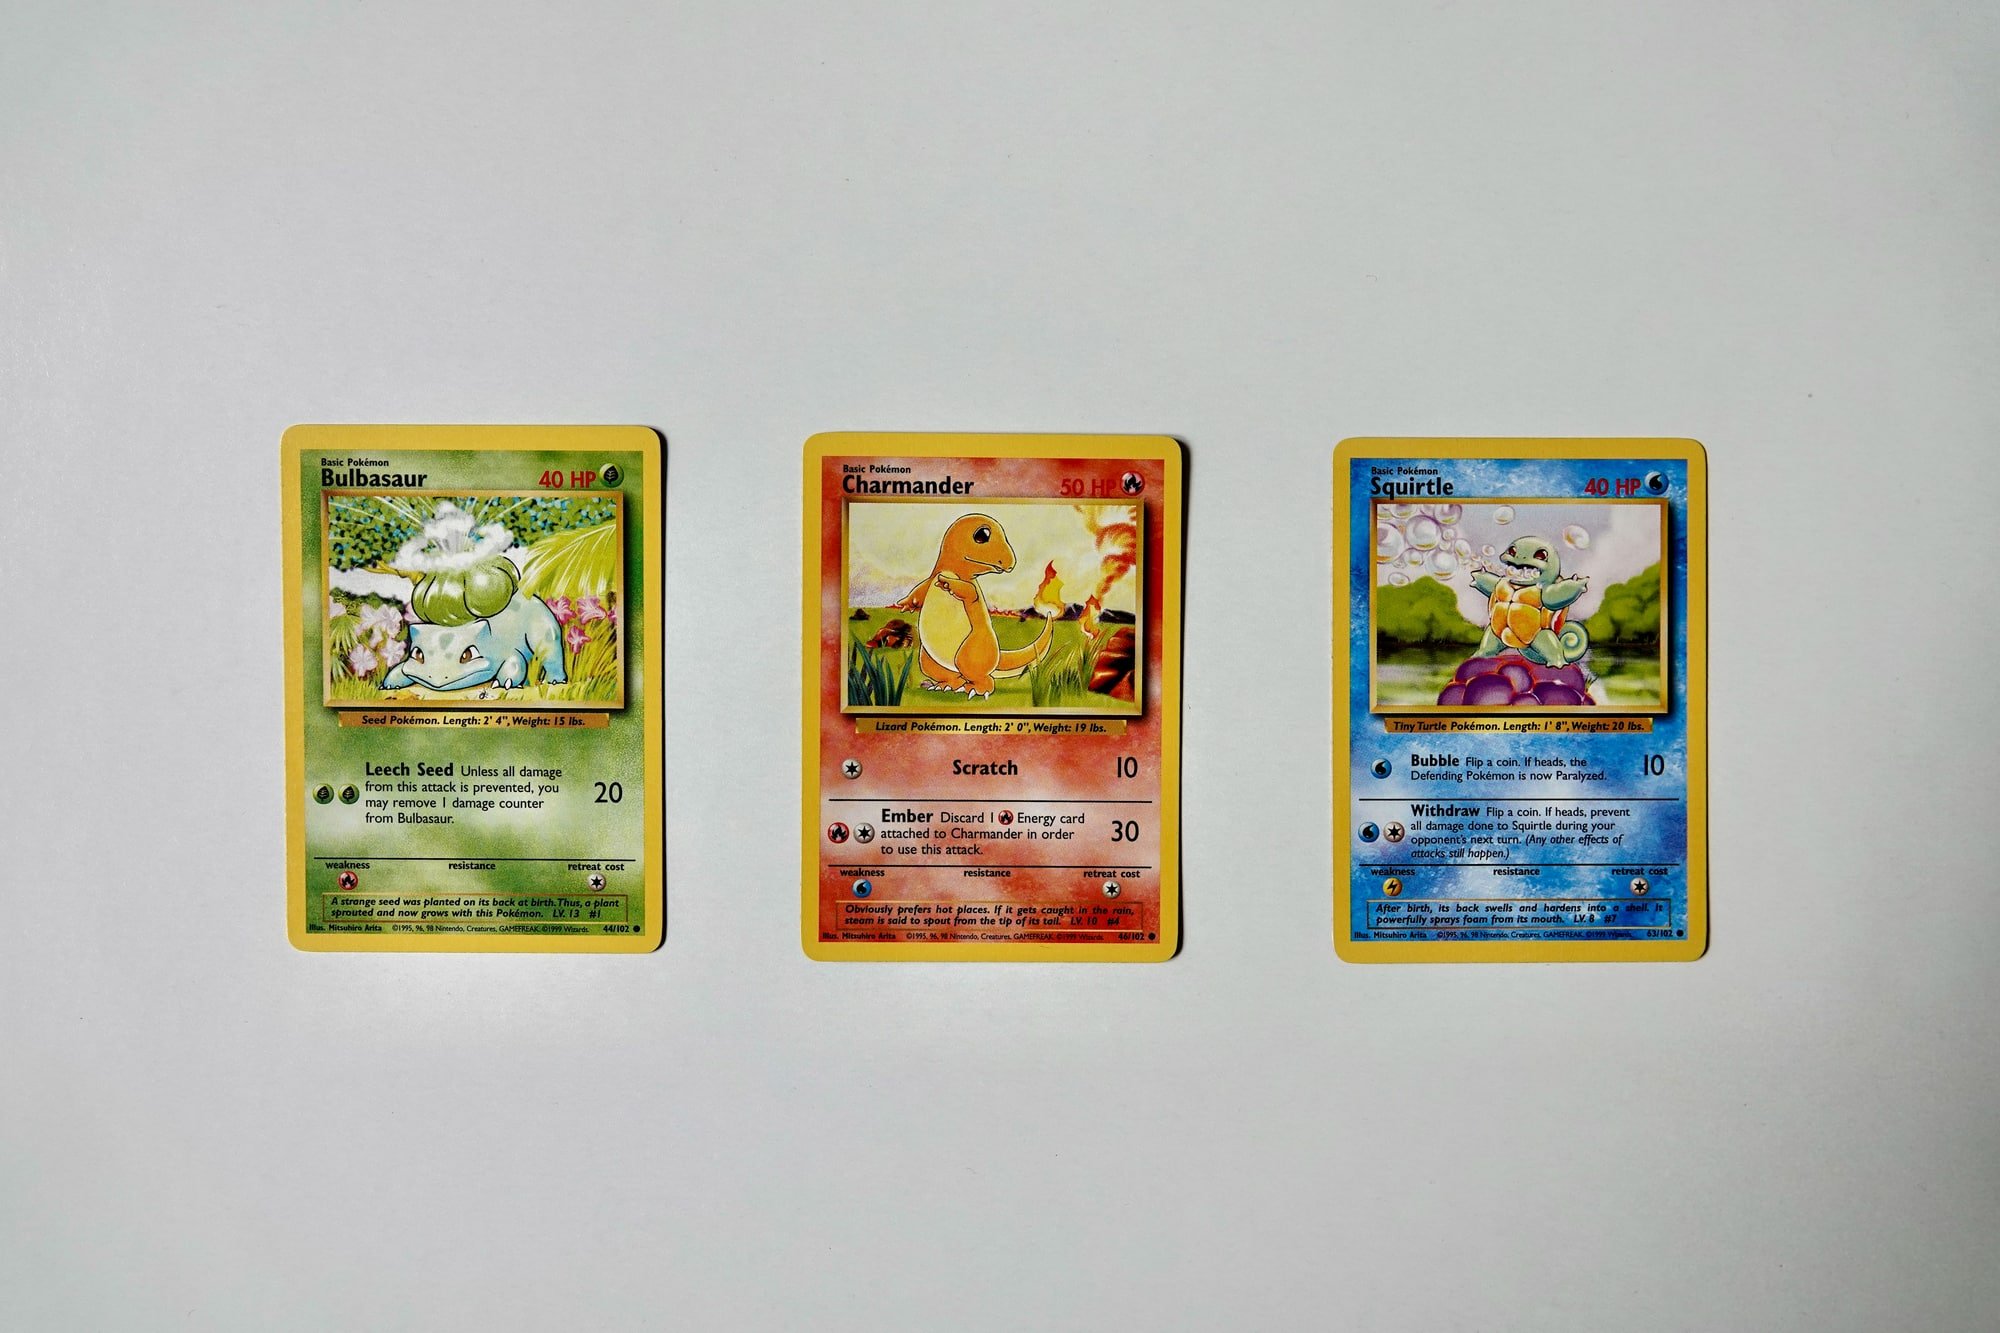 best places to sell pokemon cards